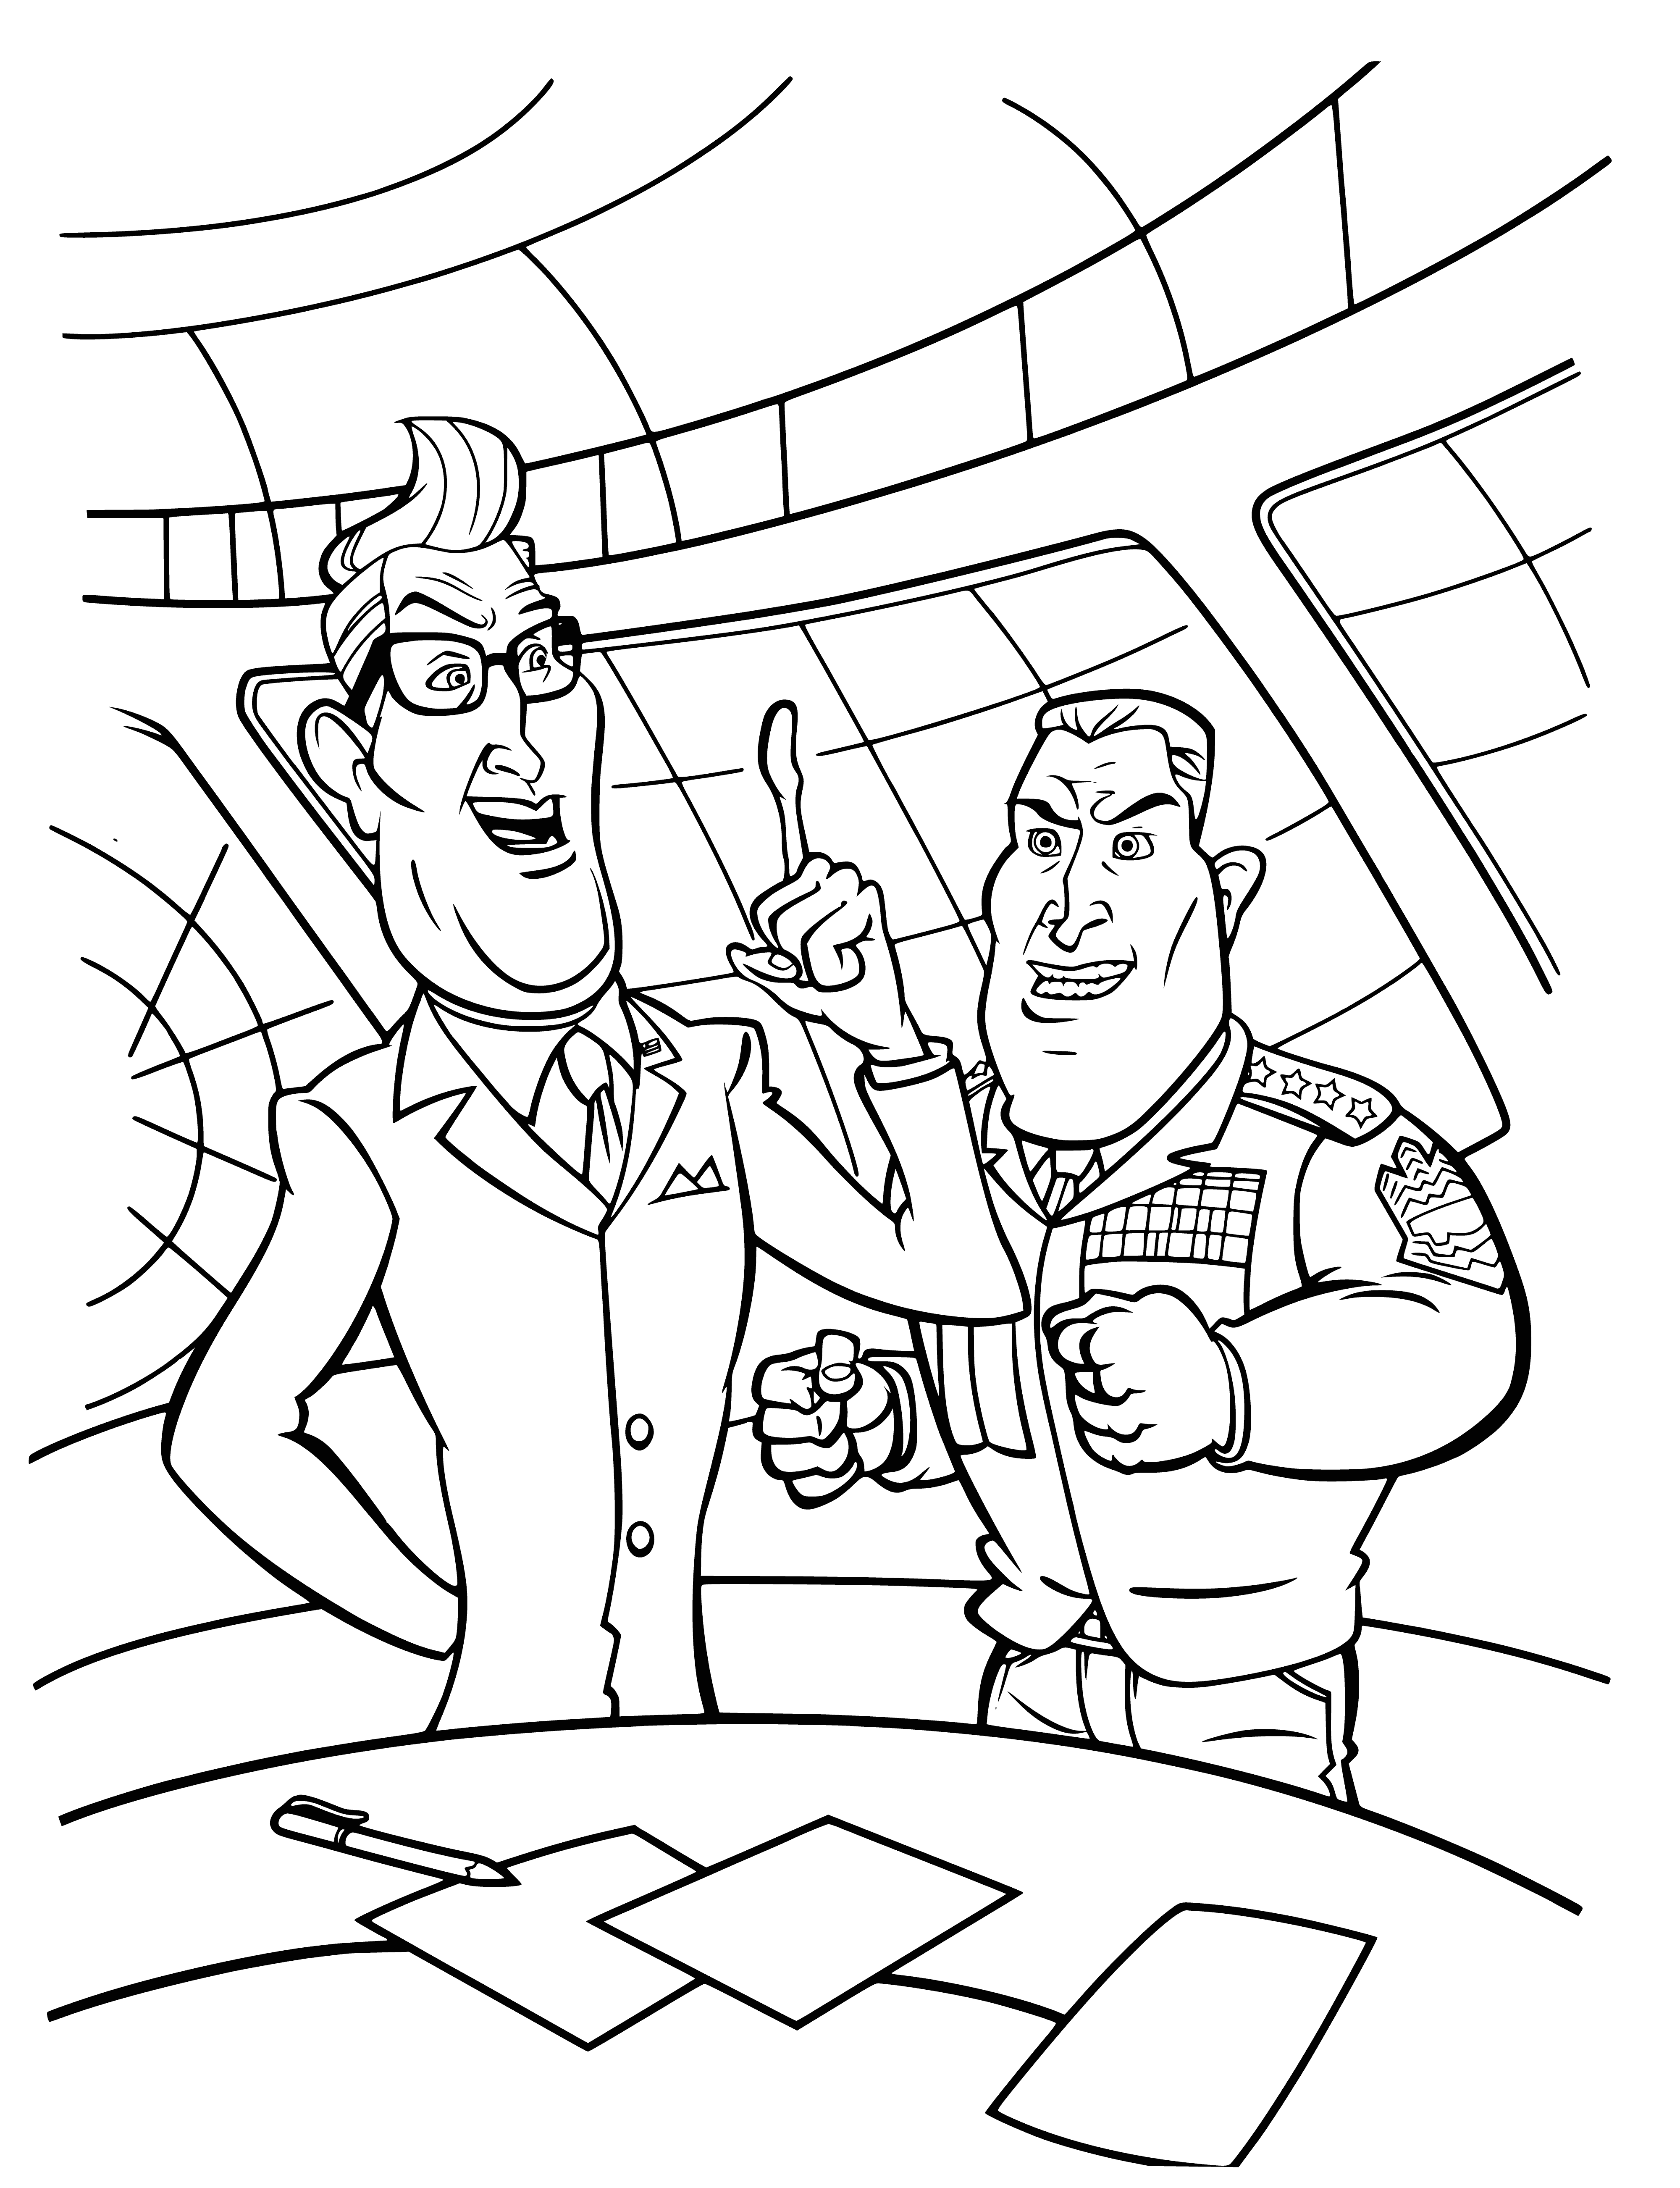 coloring page: President and Voyaker in a spaceship. Both in white space suits, President talking on radio, Voyaker looking at computer screen. #SpaceshipAdventures